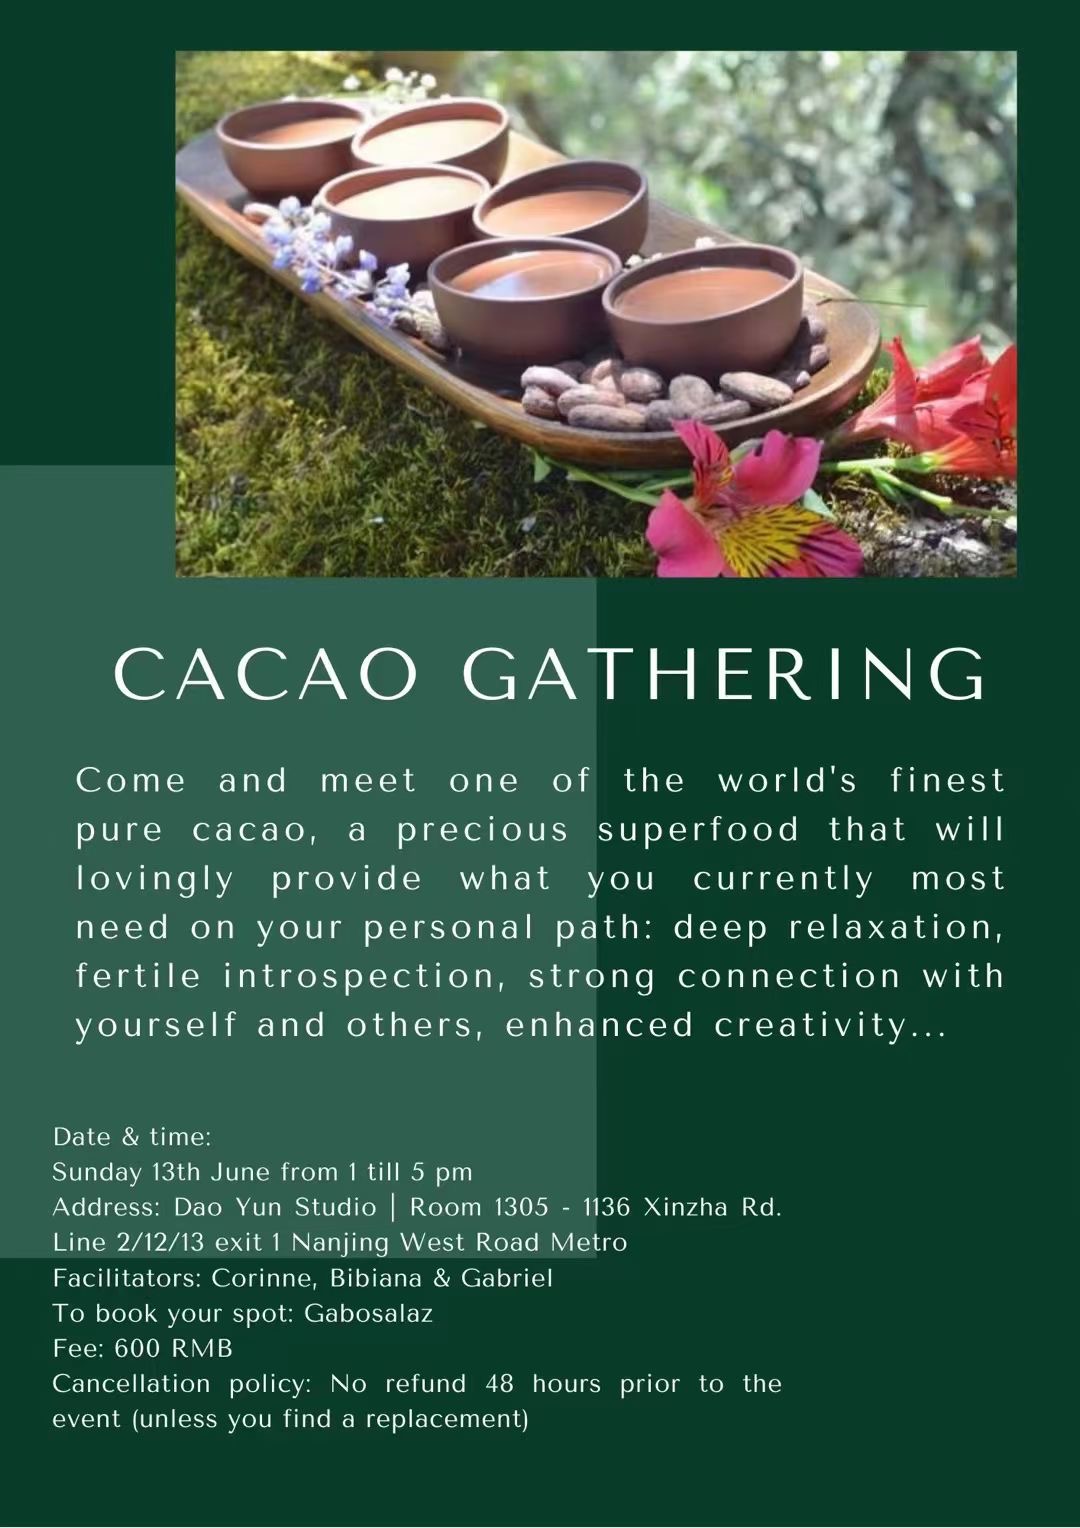 CACAO Gathering | Shanghai Events